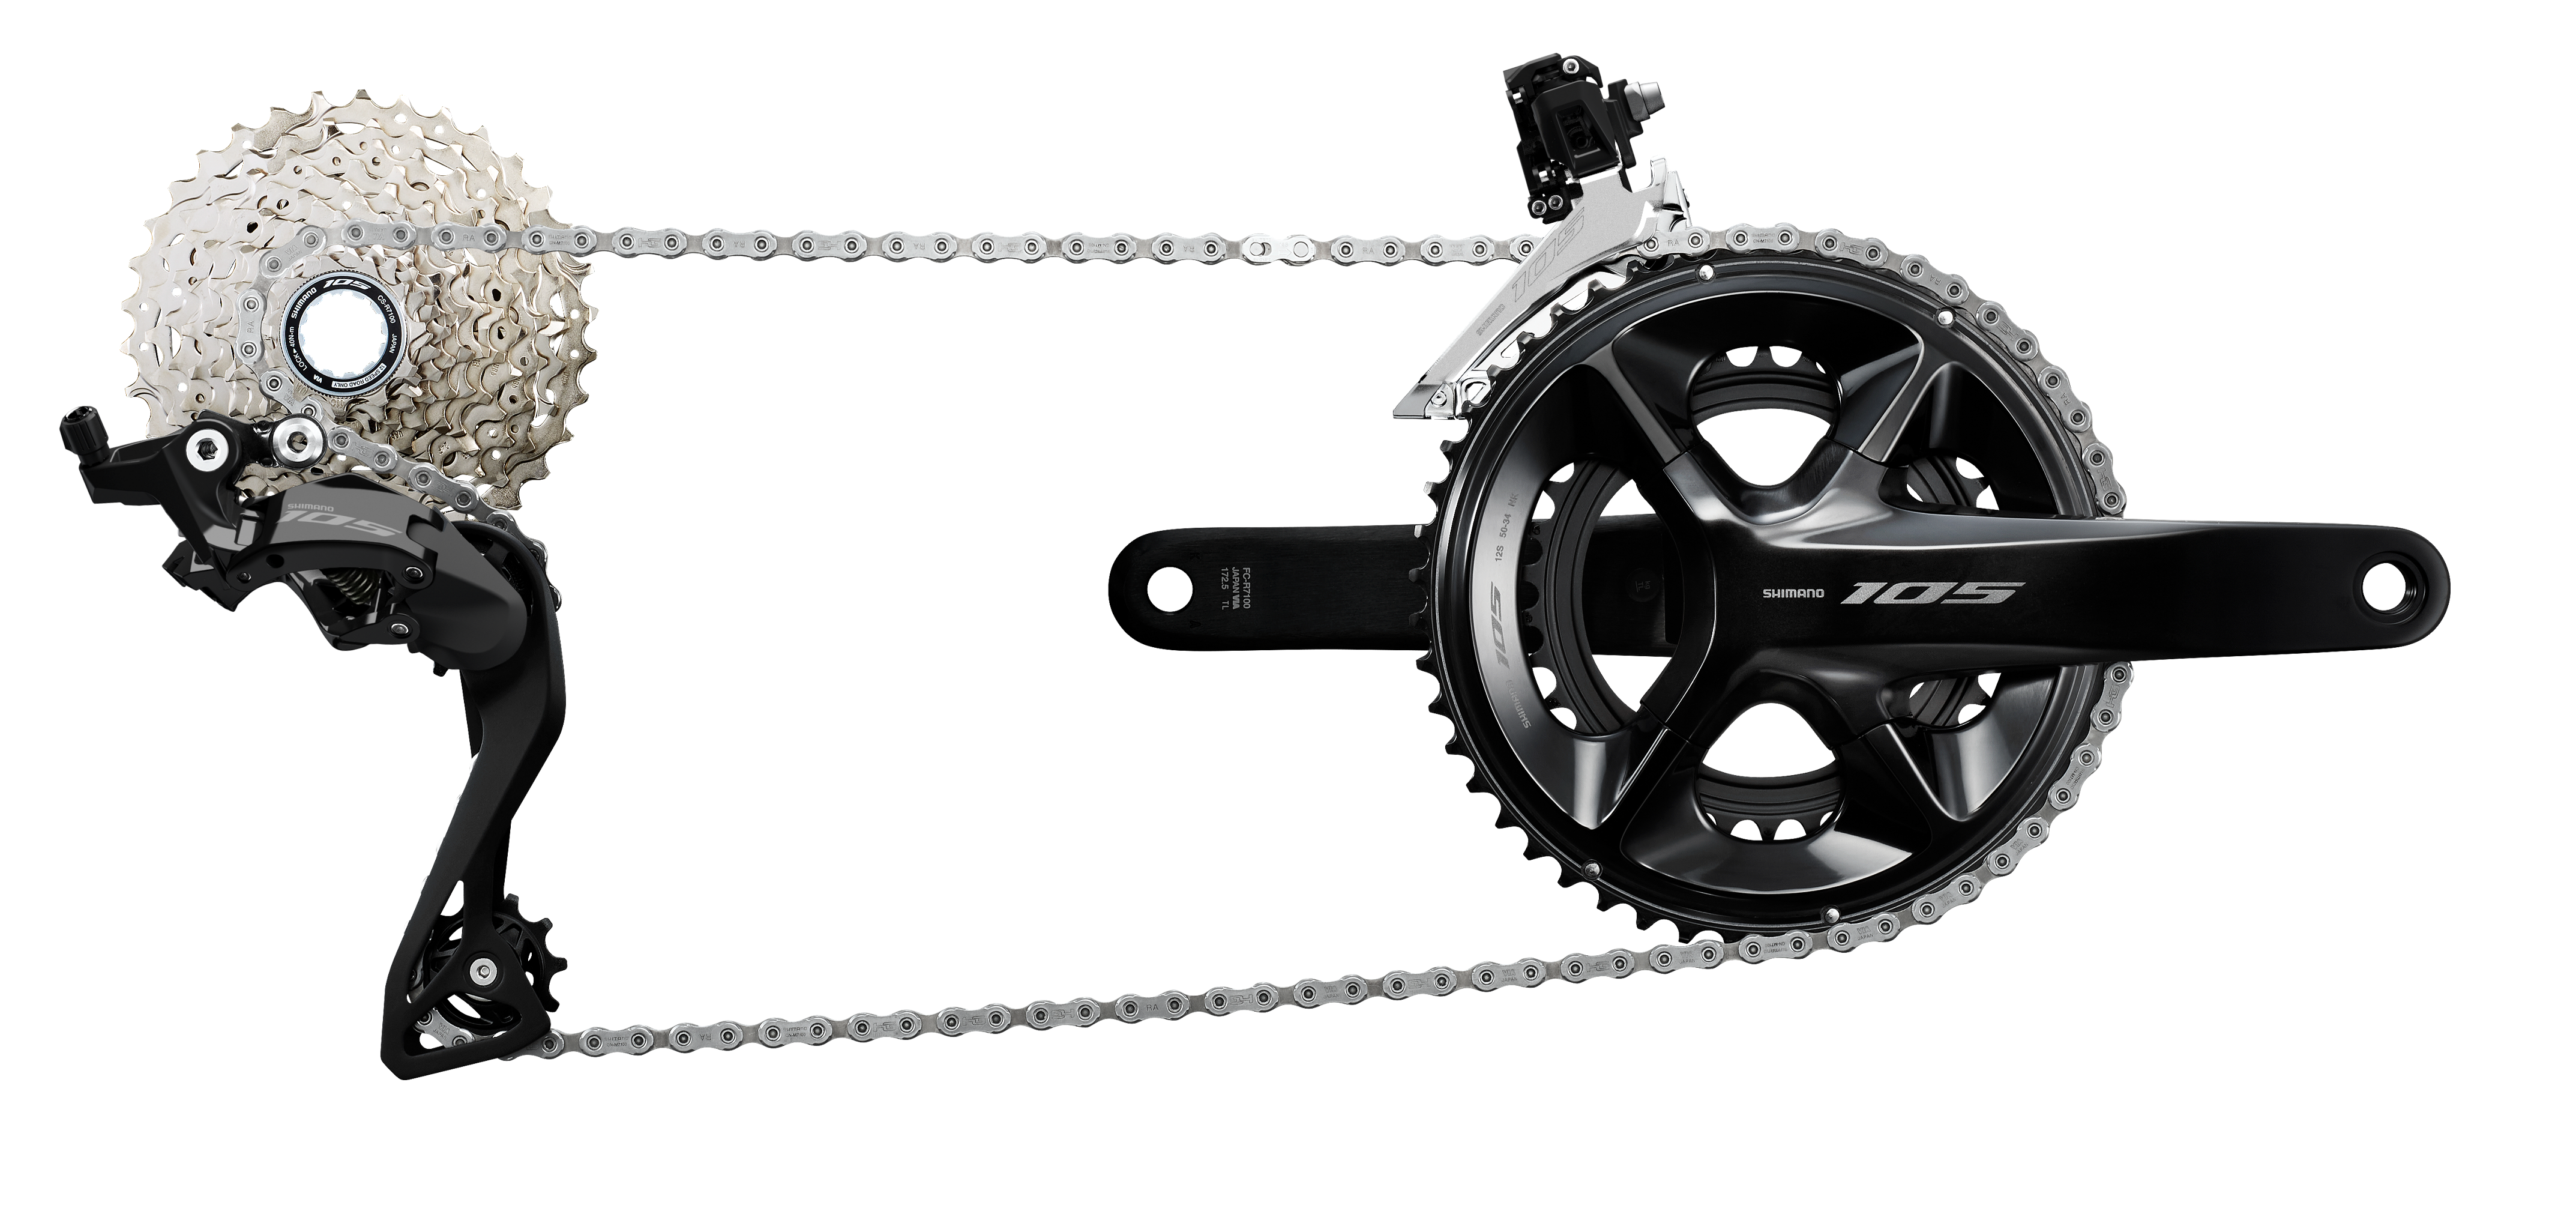 New mechanical Shimano 105 groupset is 12-speed for the first time